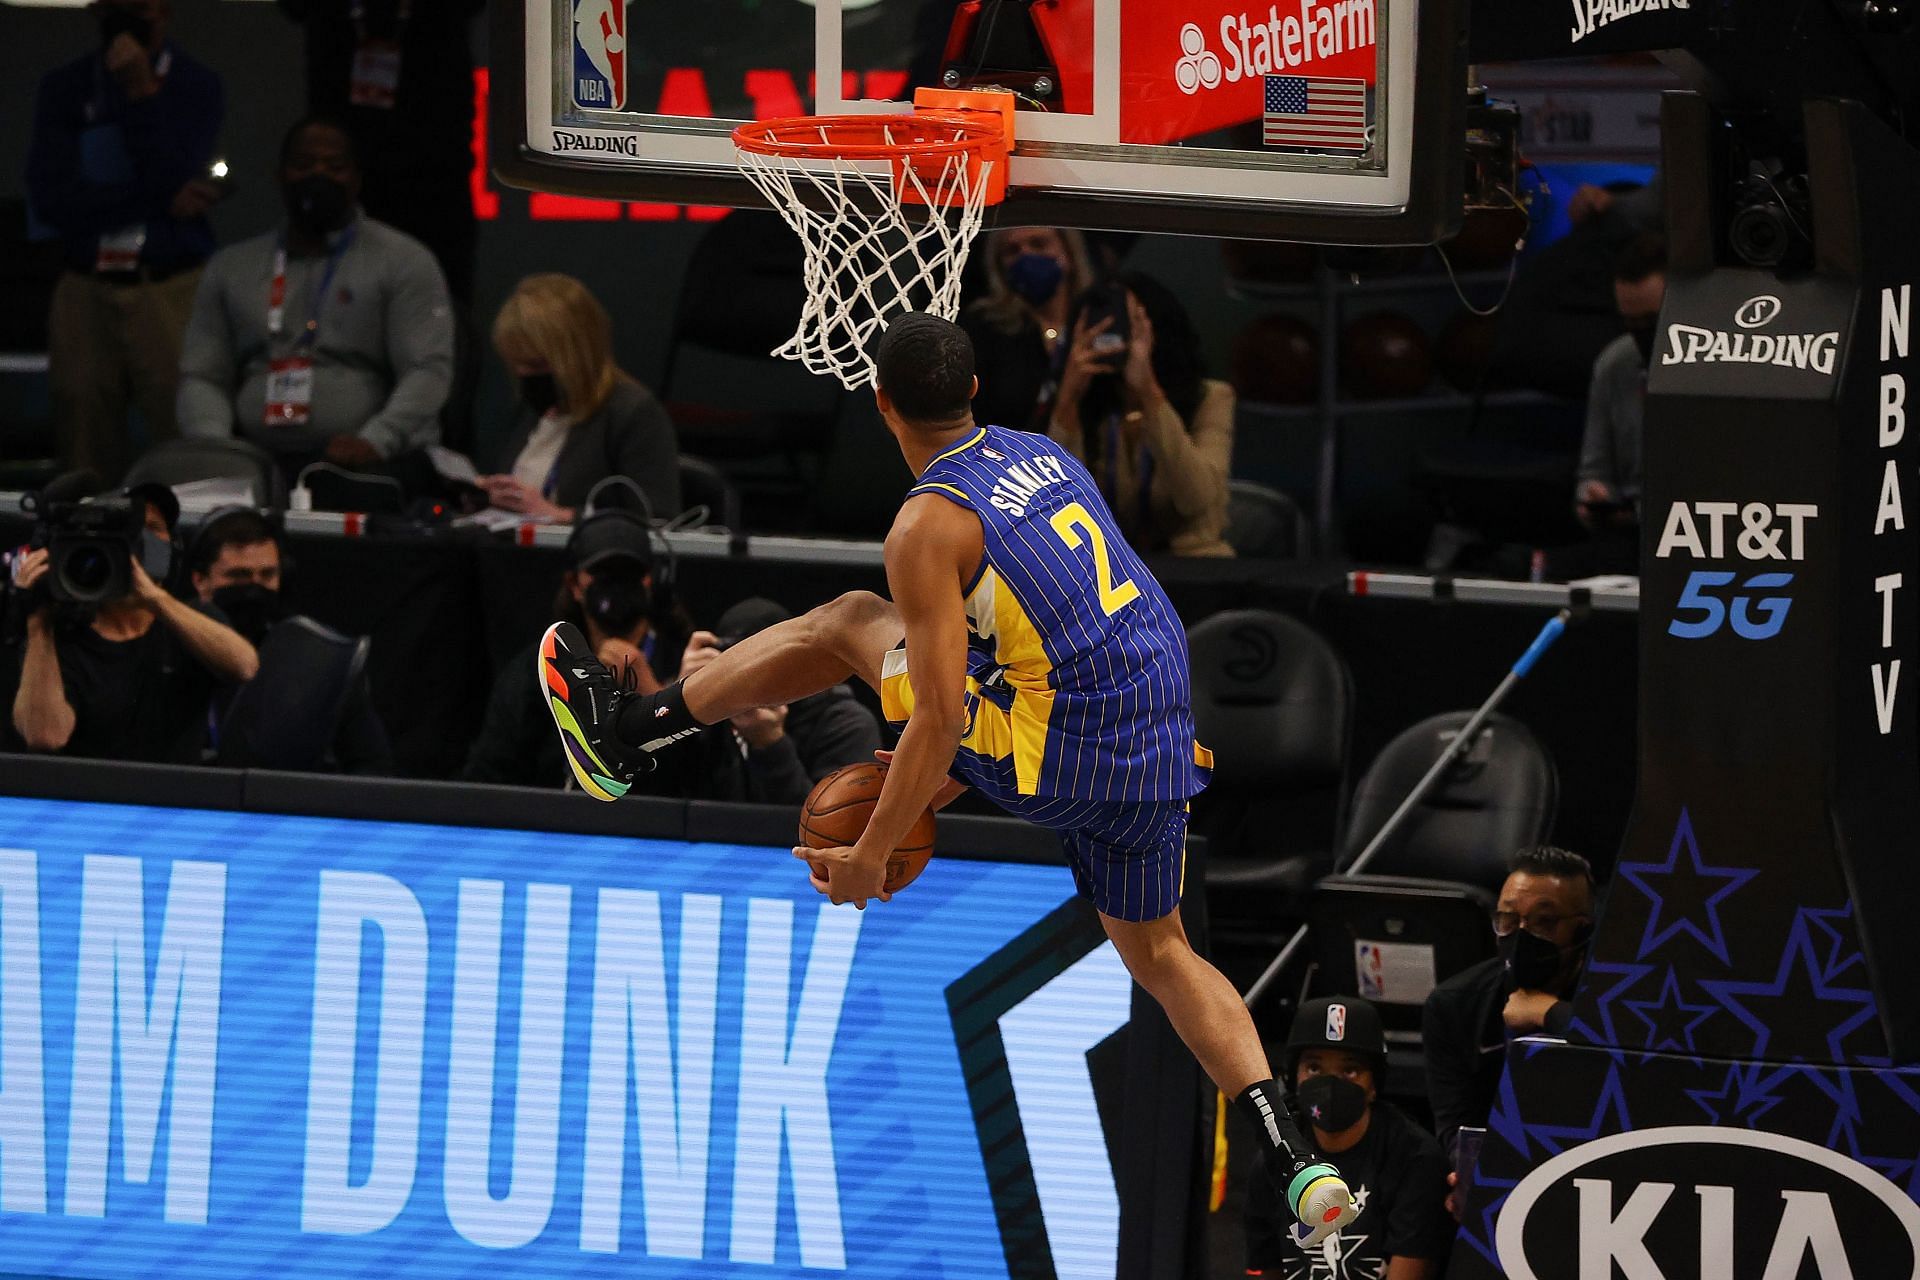 The second day will feature the slam dunk contest (Image via Getty Images)